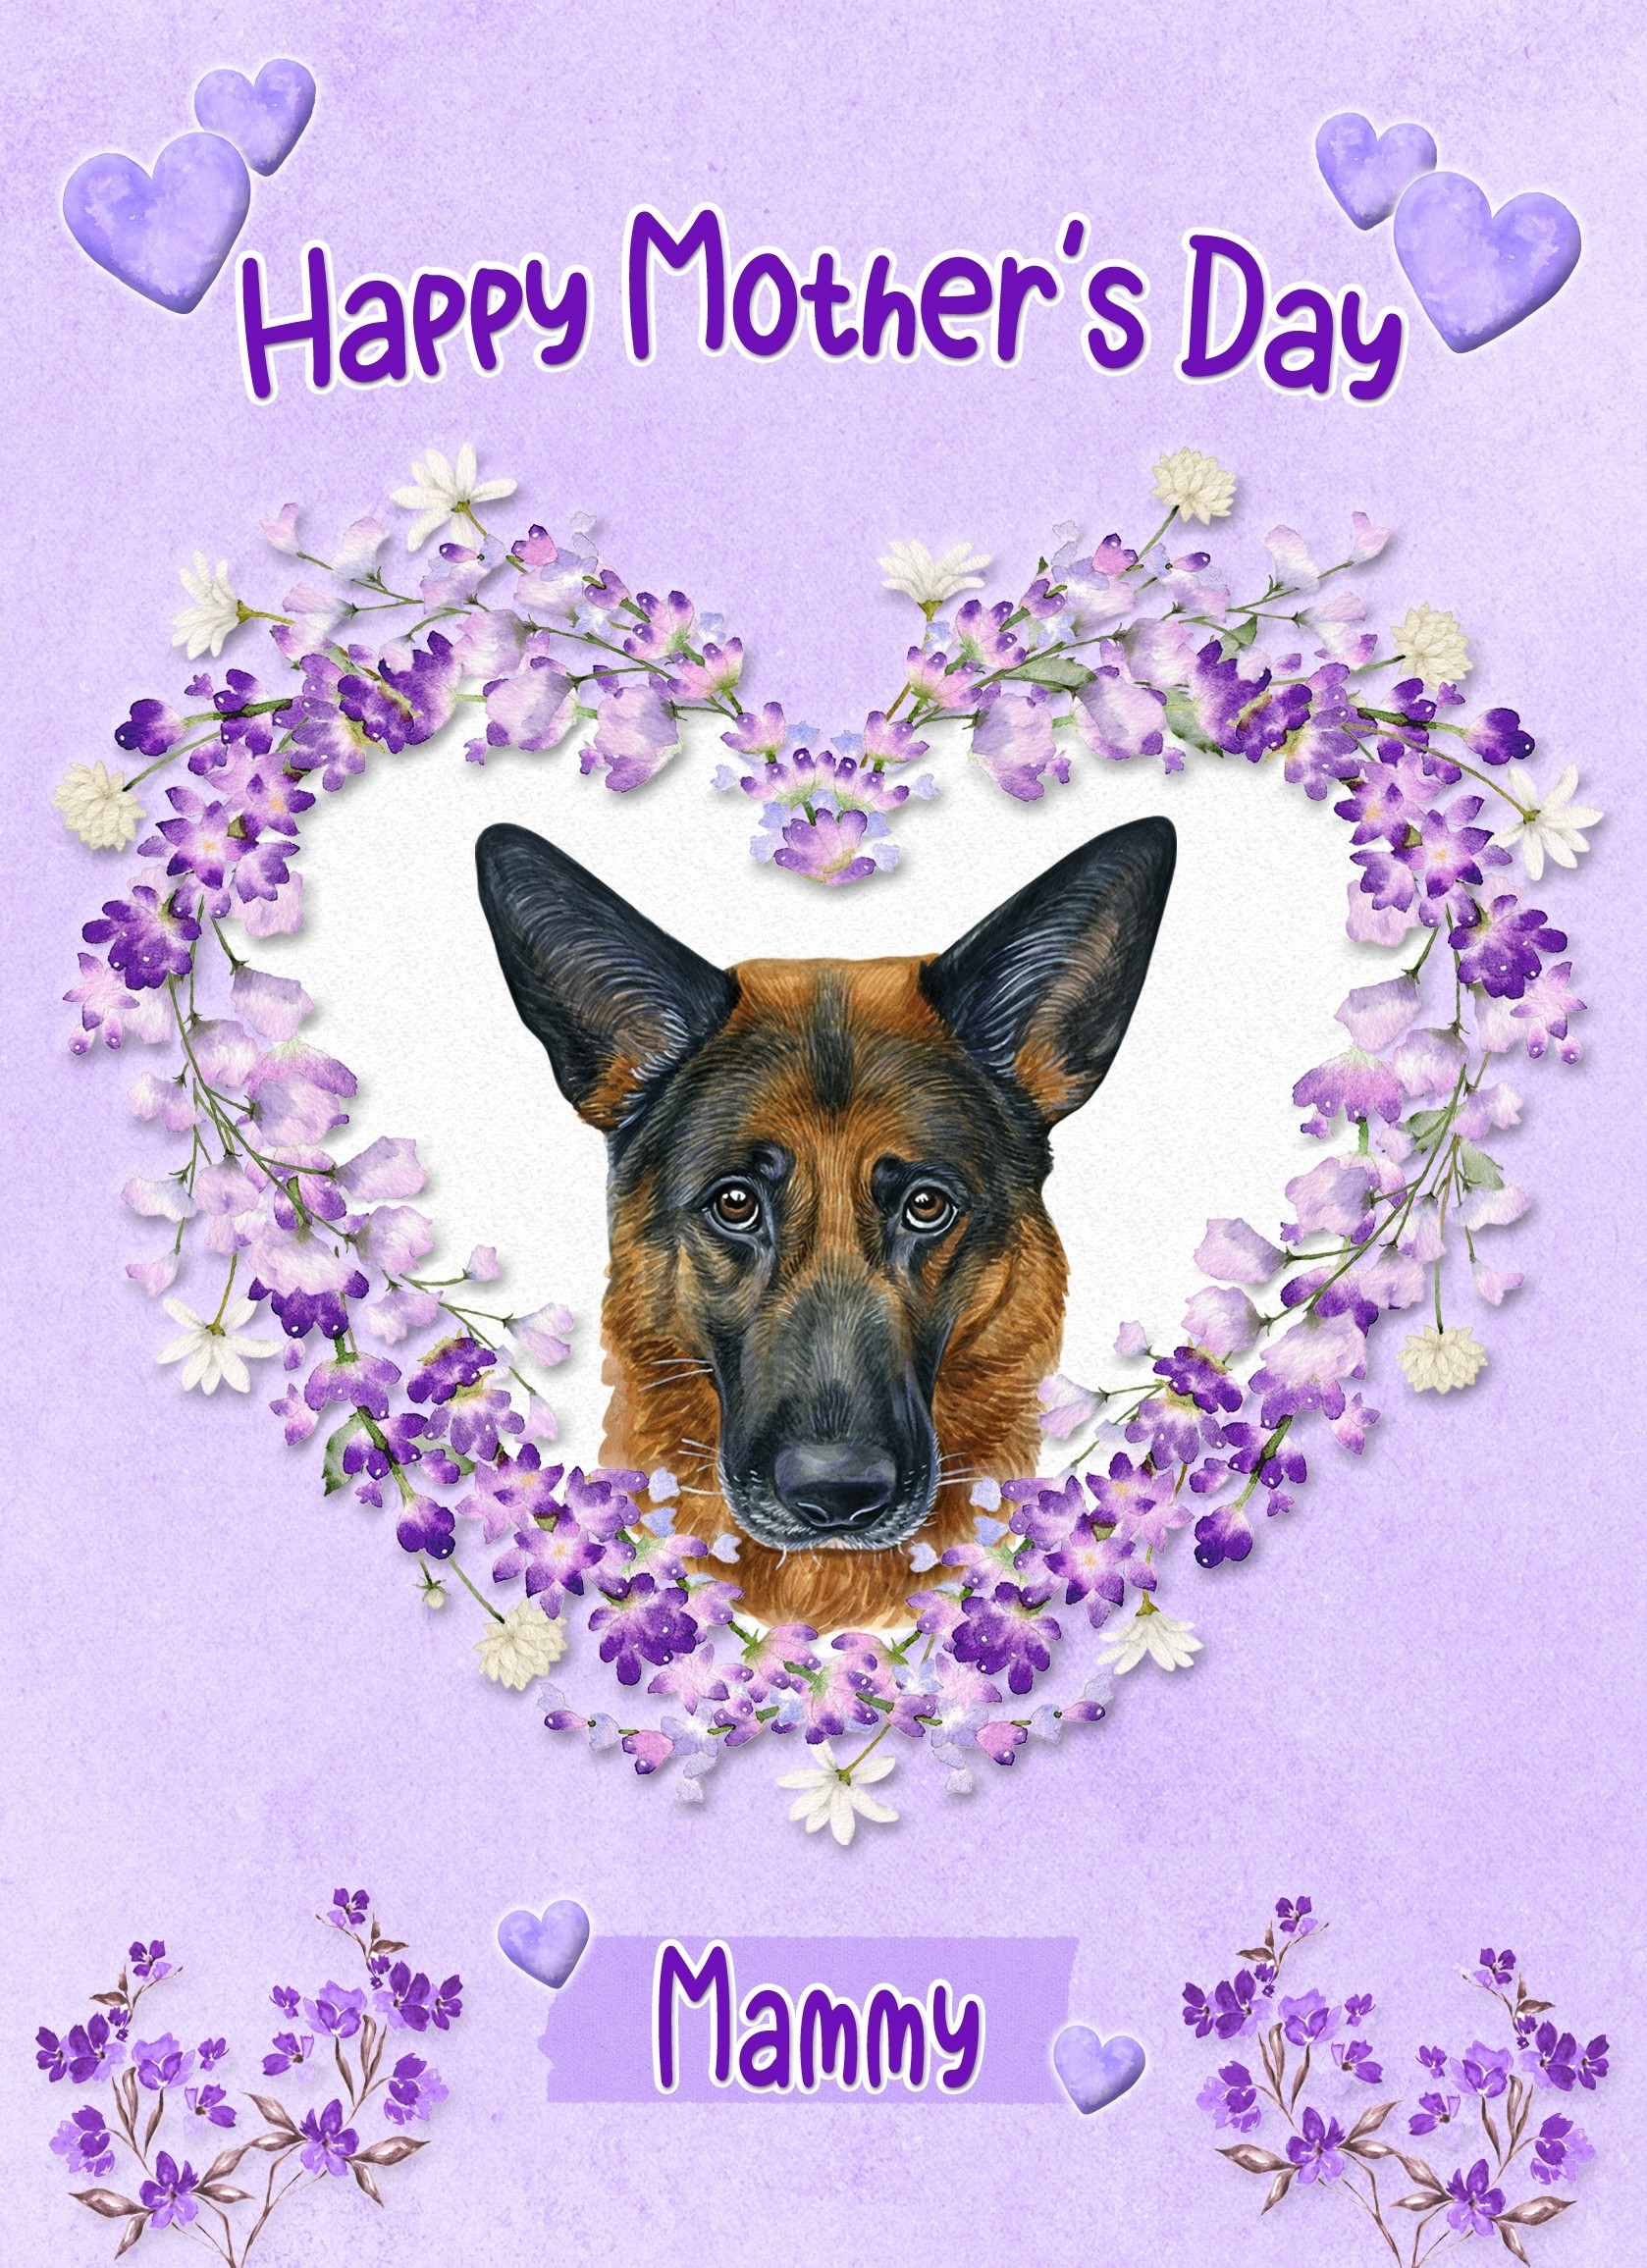 German Shepherd Dog Mothers Day Card (Happy Mothers, Mammy)